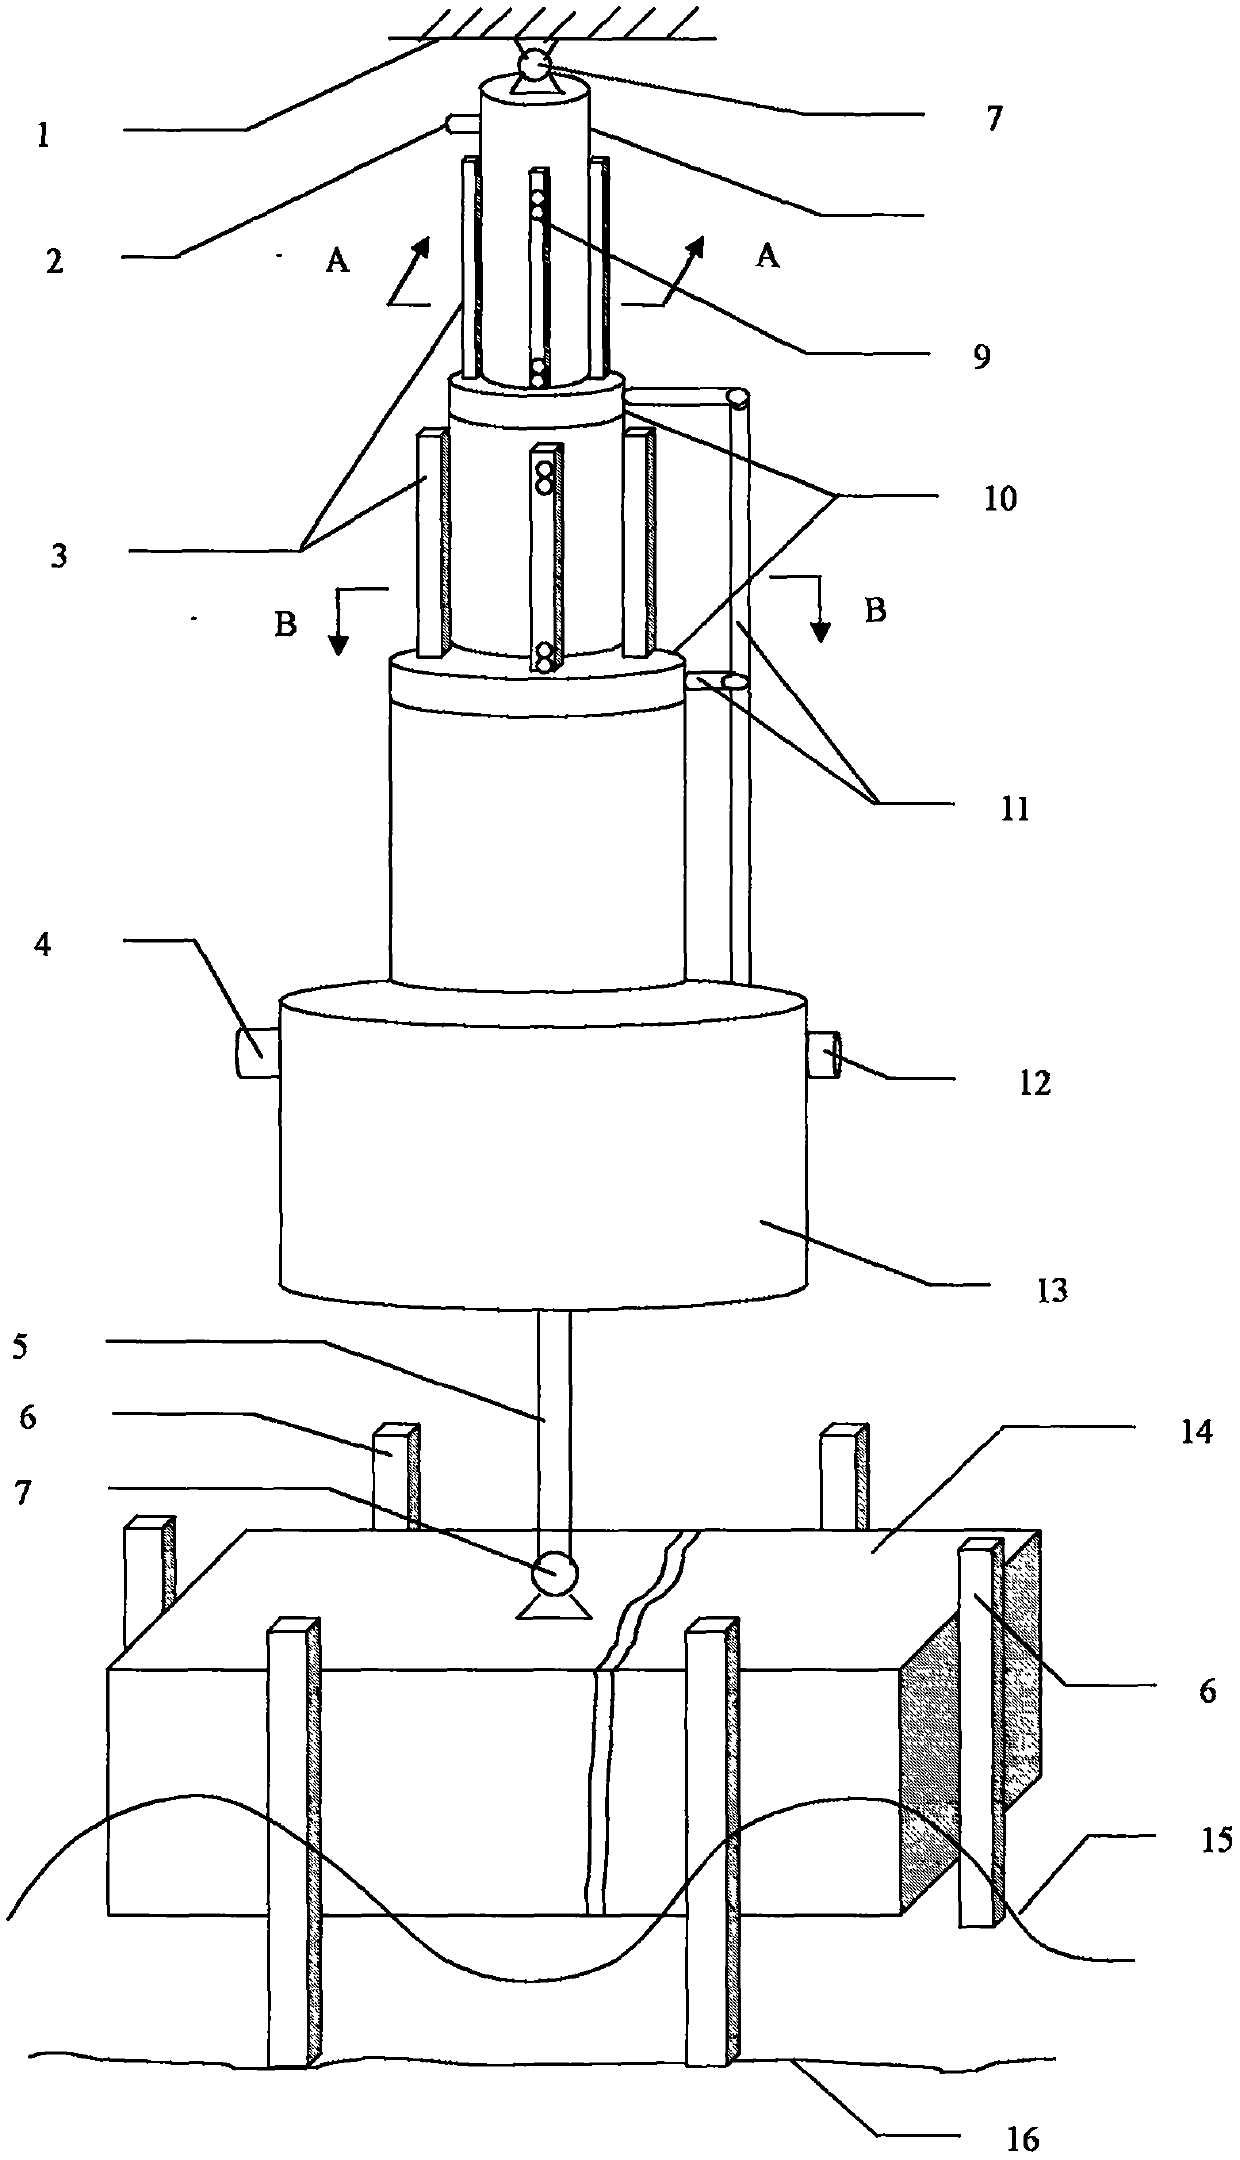 Buoy and cylinder combination structure capable of covering whole tidal range and compressing air by utilizing wave energy